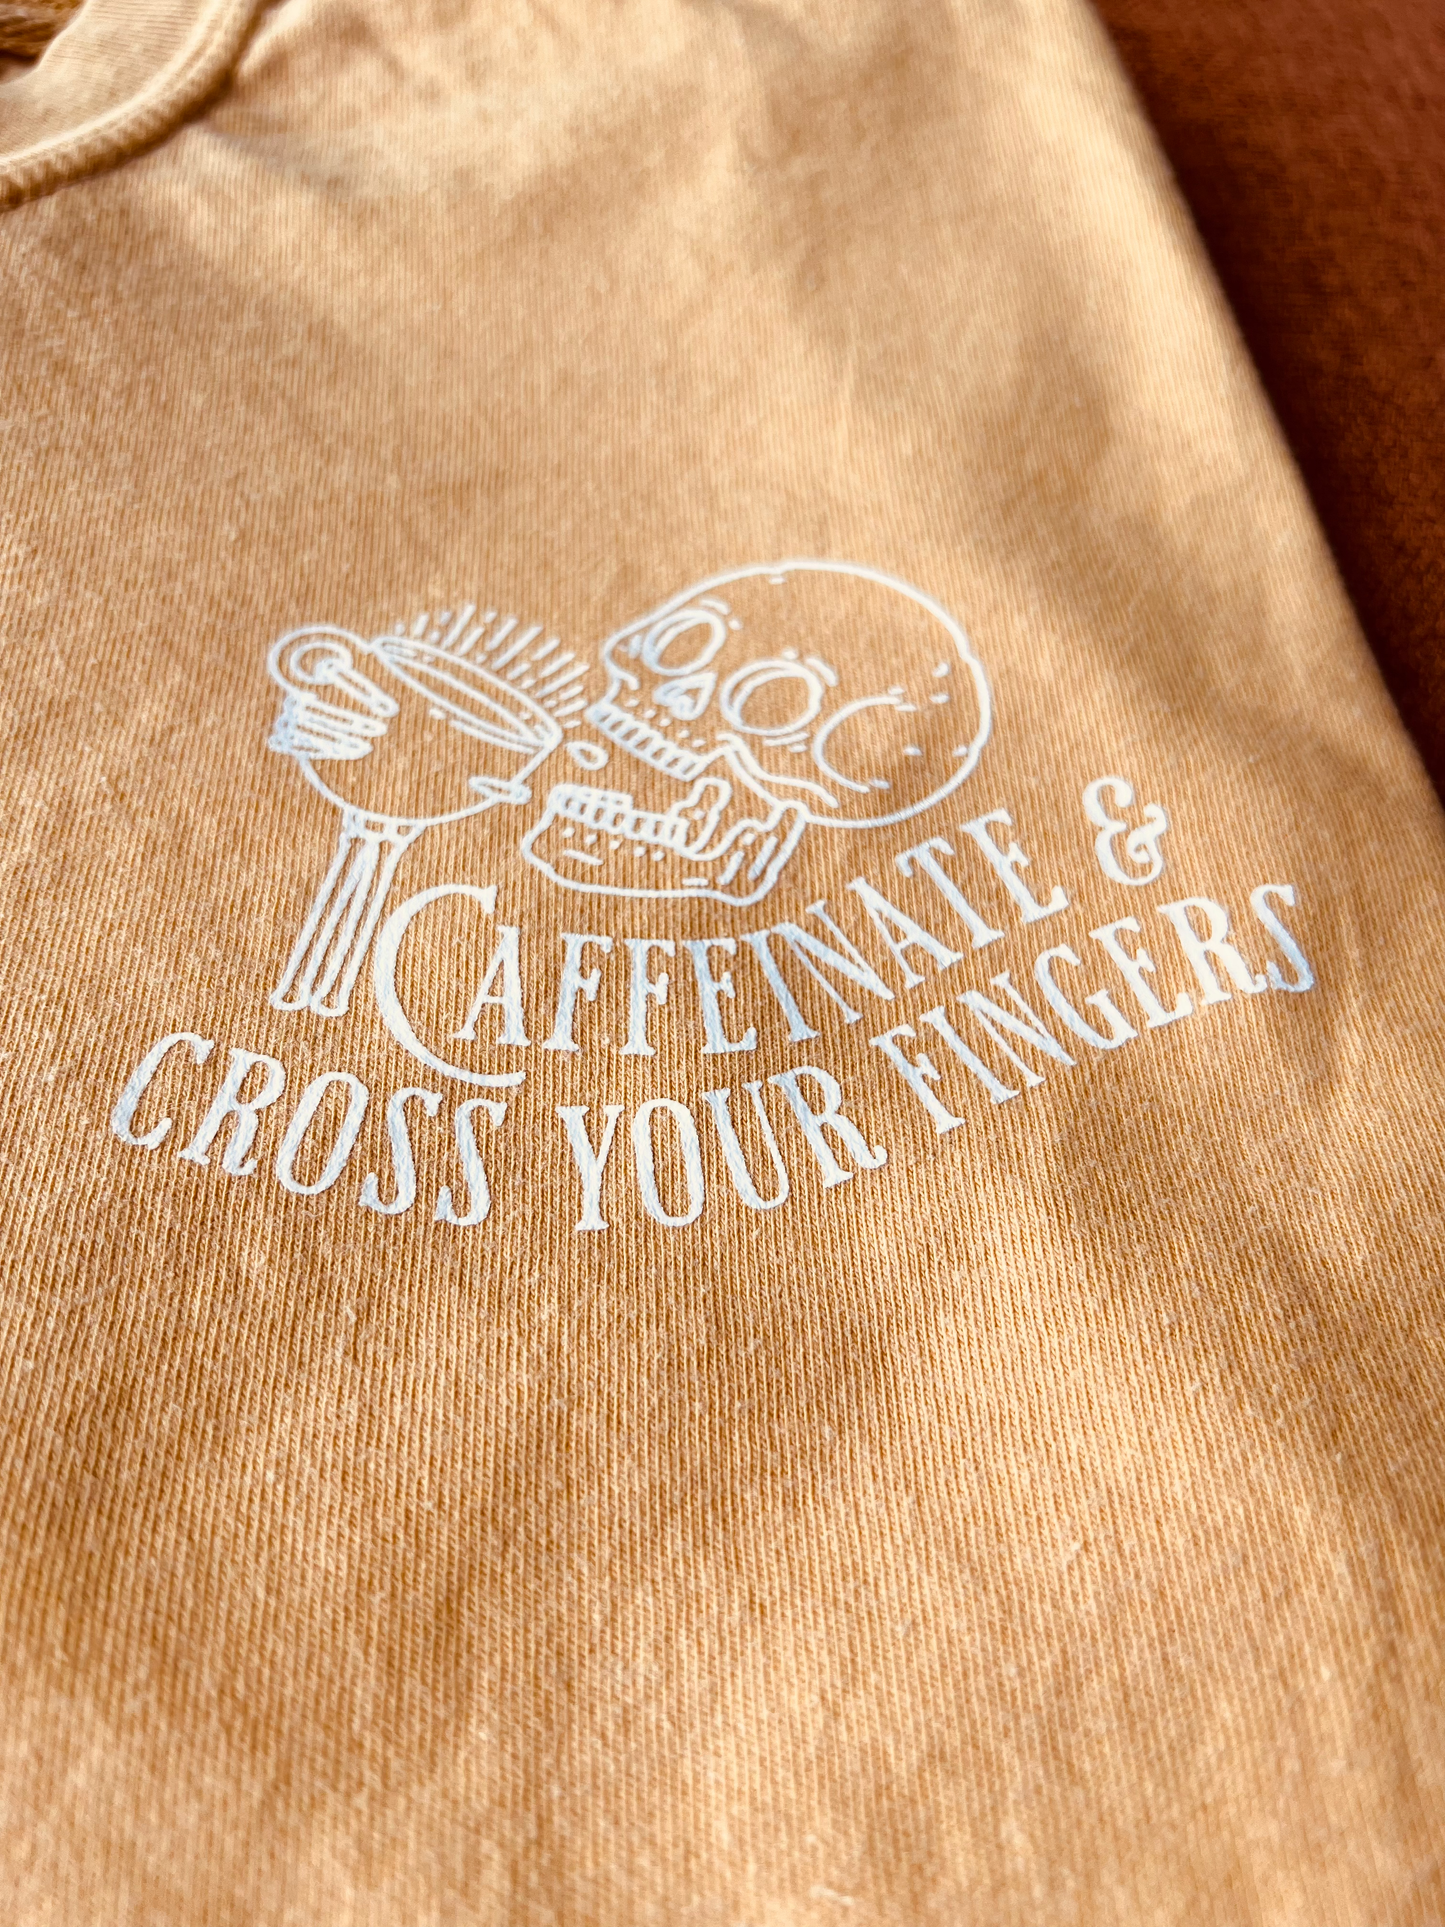 Caffeinate and Cross Your Fingers - Easy Tee